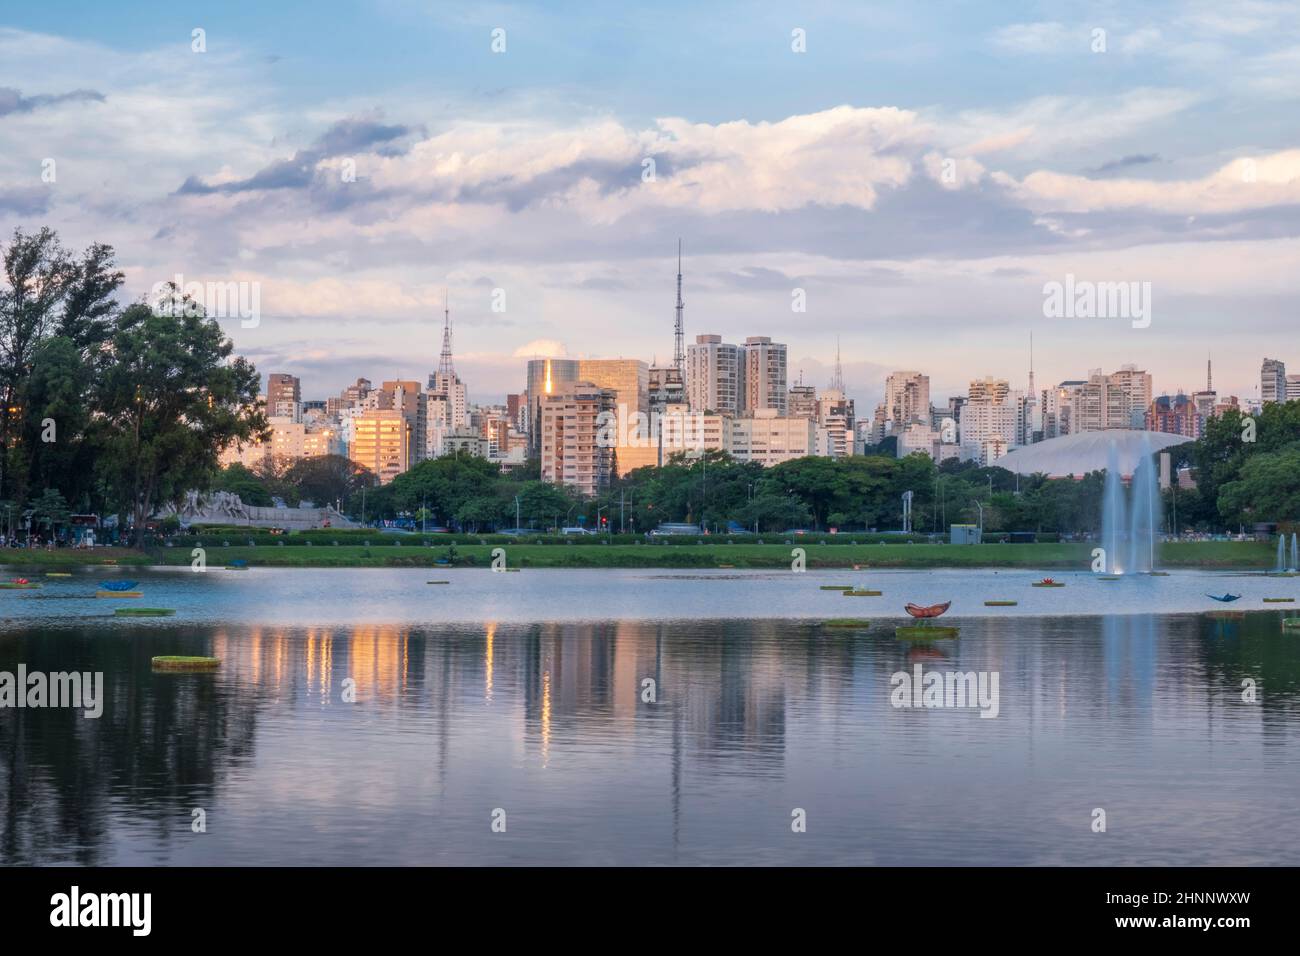 Brazil, Sao Paulo, Sao Paulo City, view of the lake and fountains in Ibirapuera Park in the late afternoon, city skyline, summer day Stock Photo